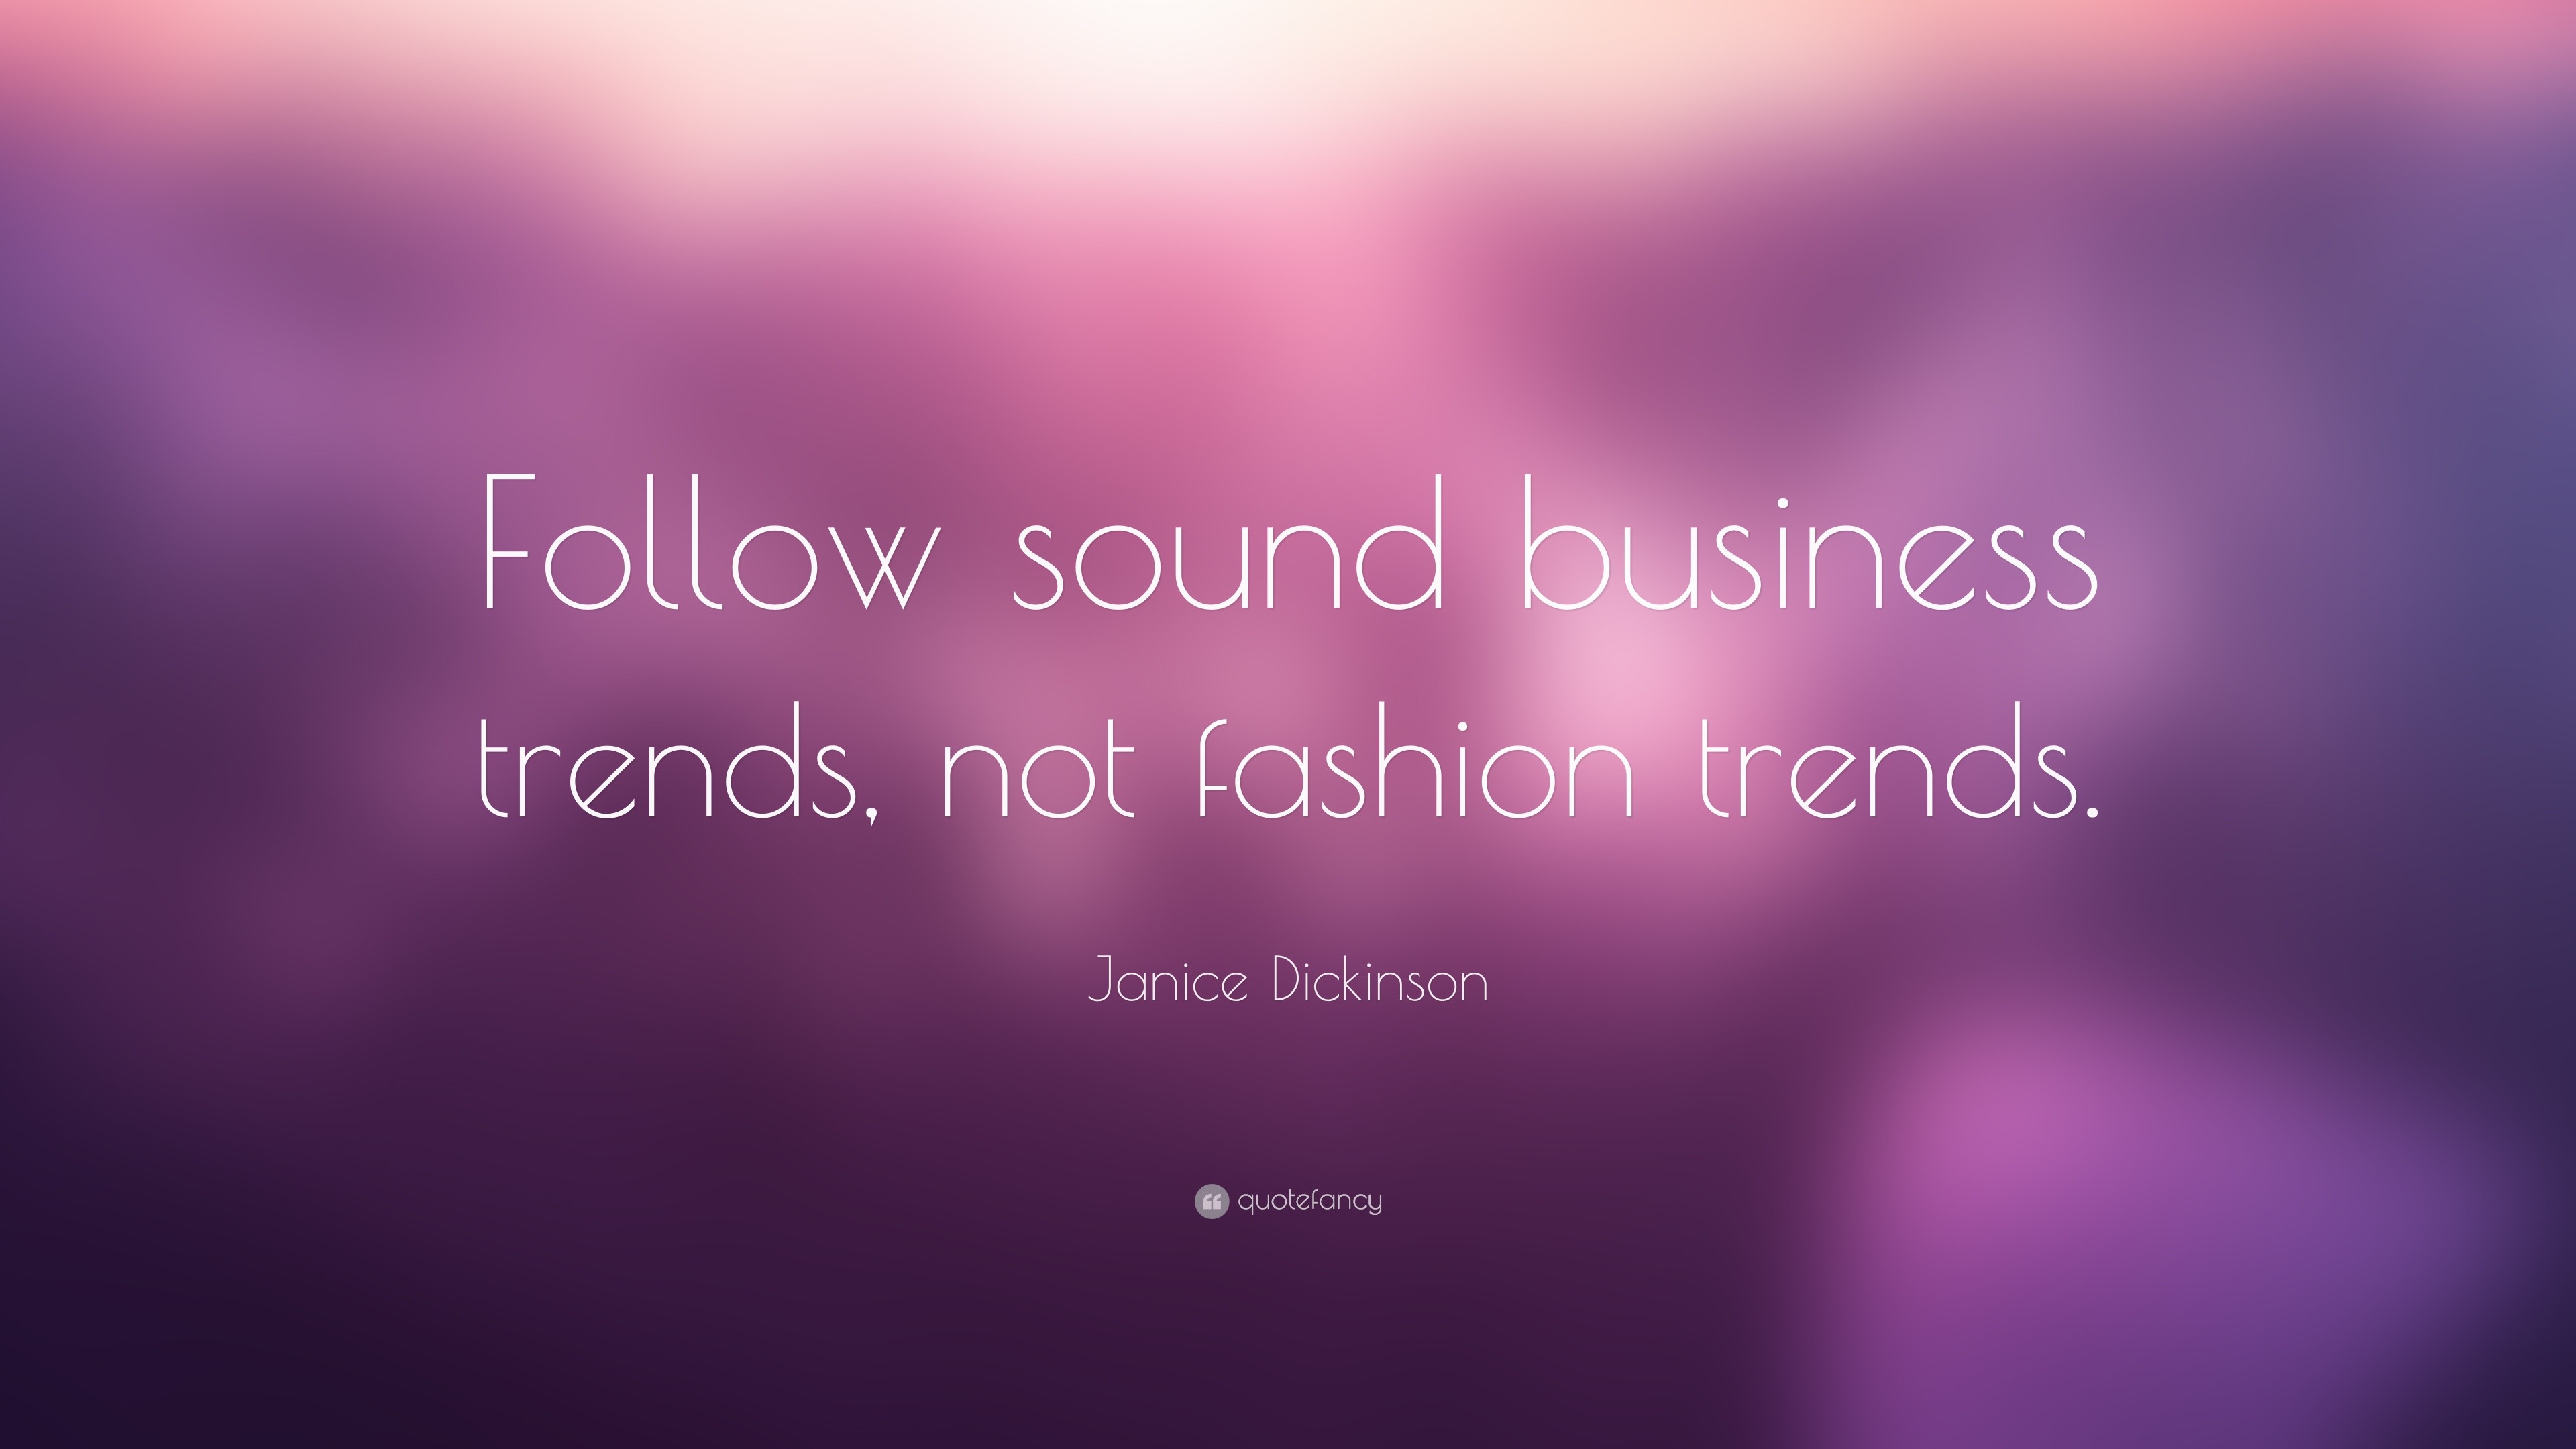 Janice Dickinson Quote: "Follow sound business trends, not fashion trends." (7 wallpapers ...